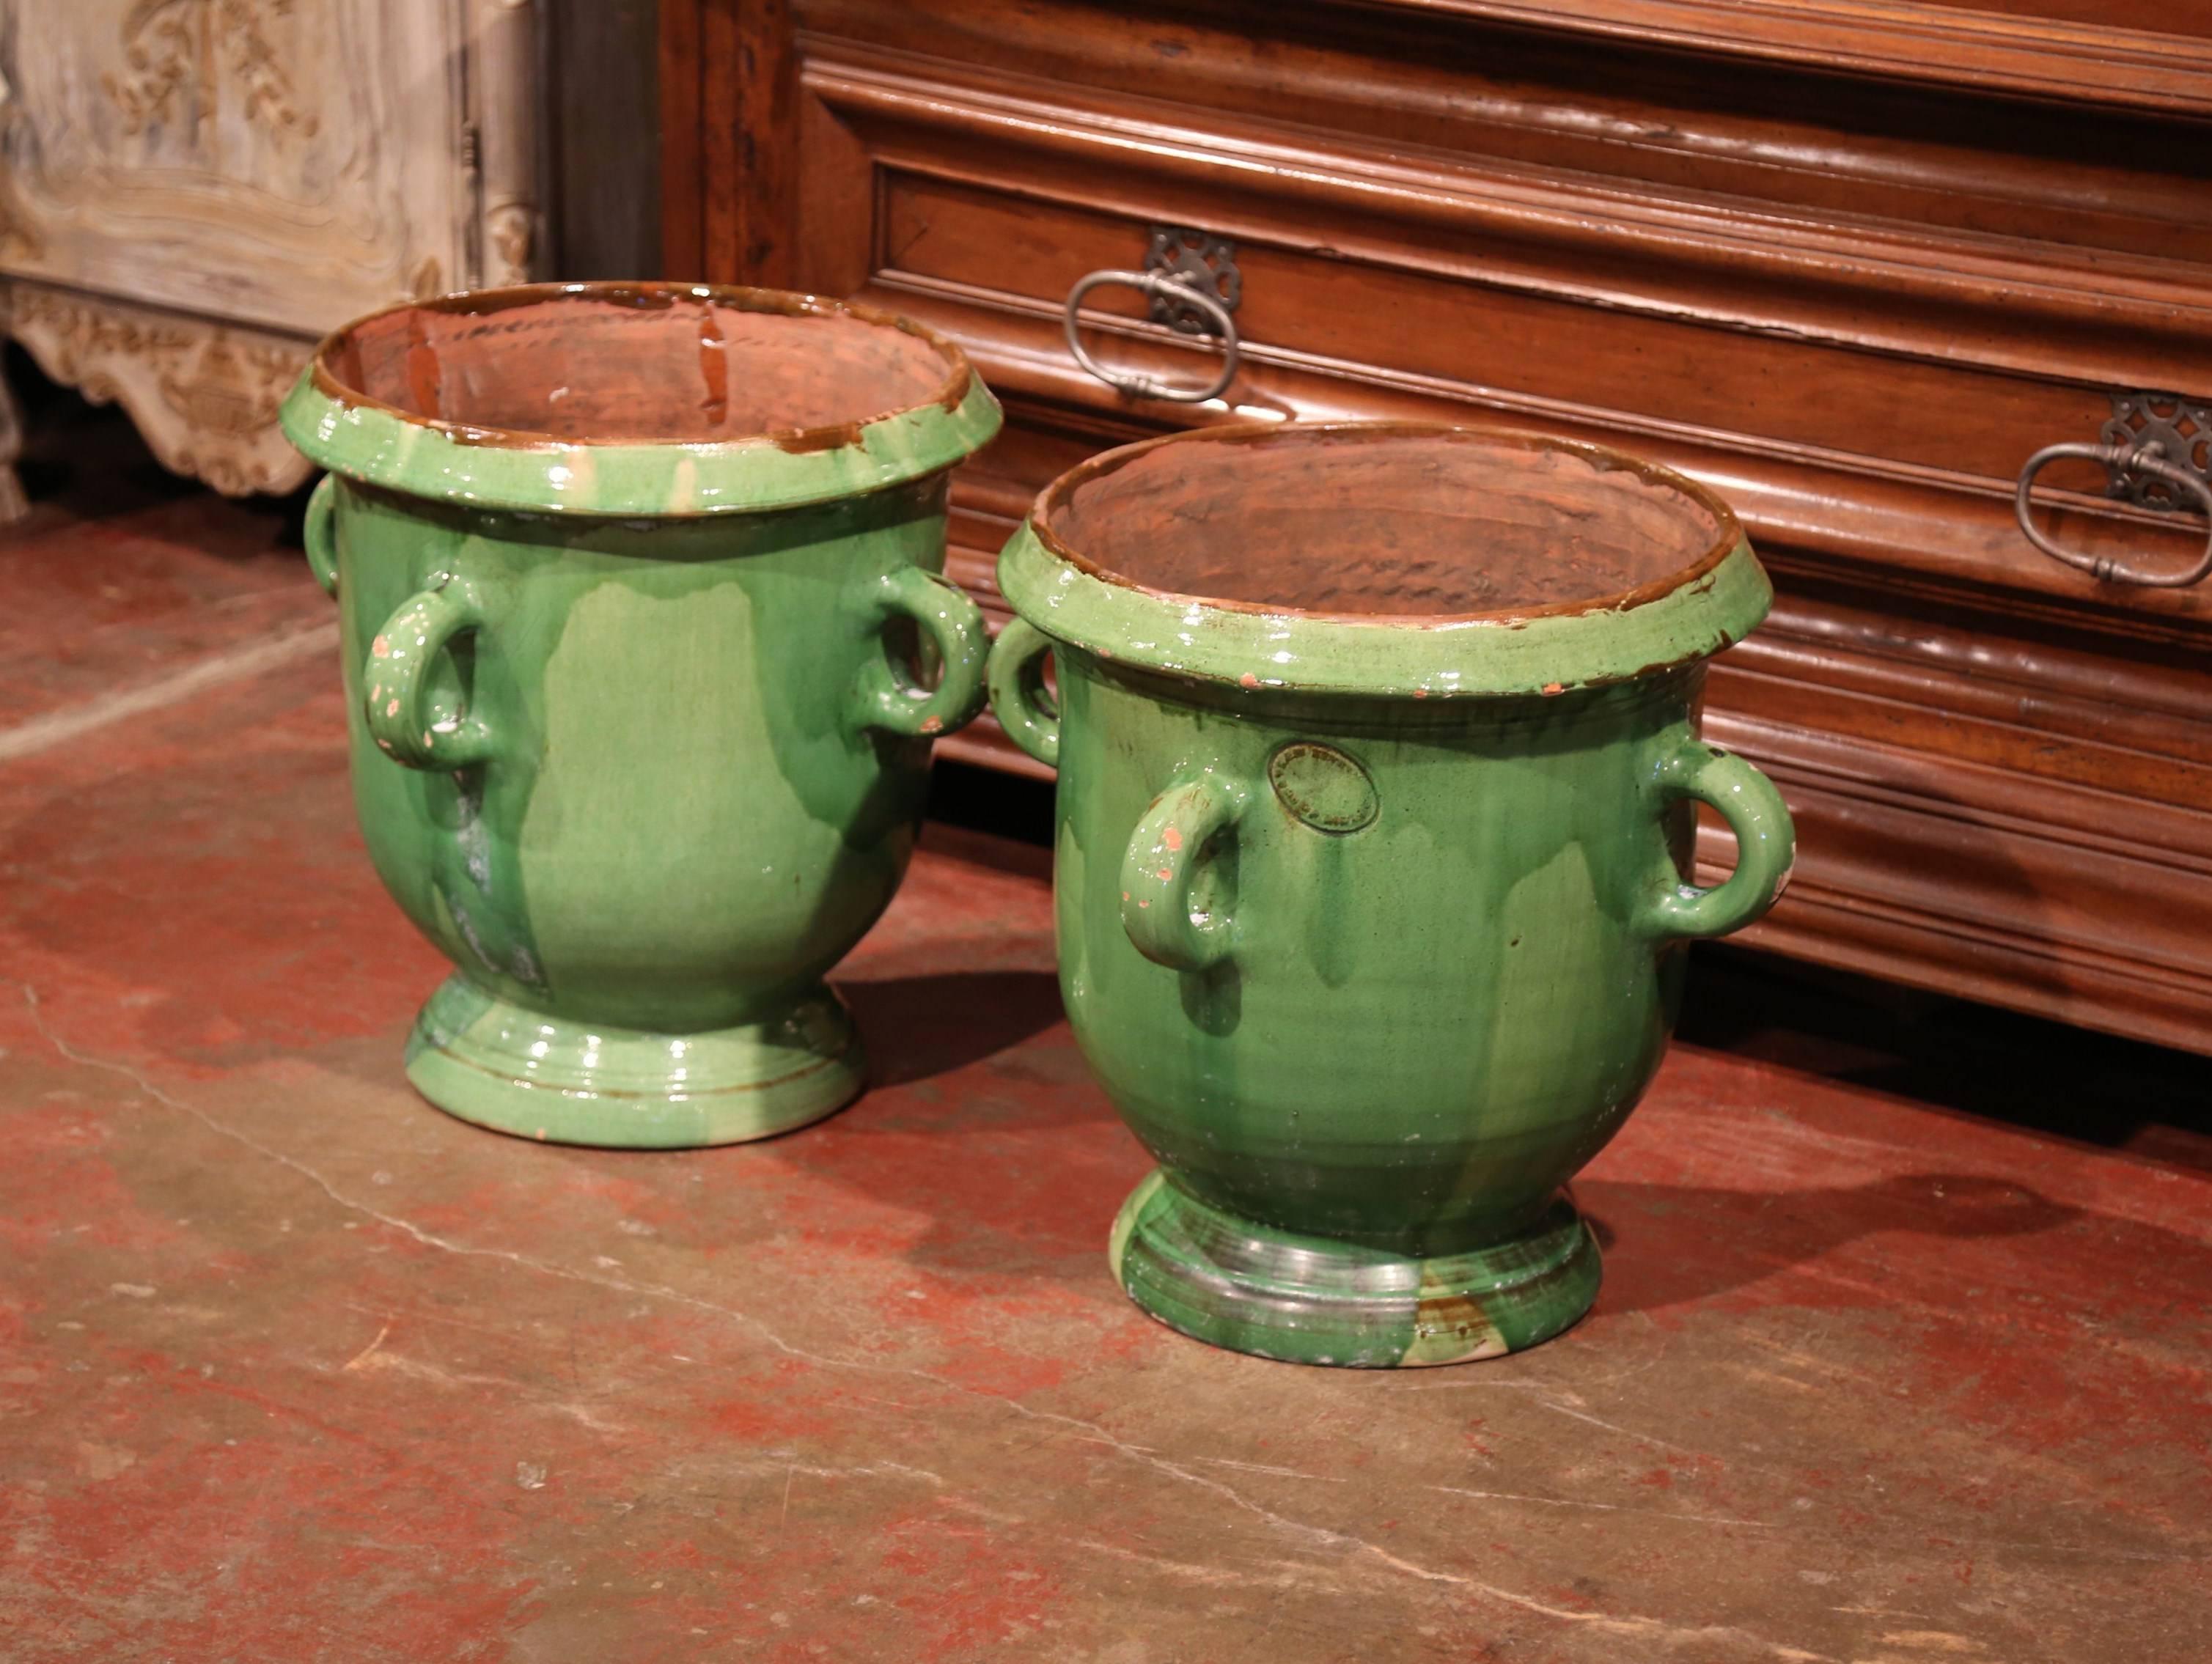 This large, colorful pair of terracotta pots was created near Anduze, France circa 1960. Each classic earthenware planter has four handles and has been recovered with a glazed Provençal green finish. The pots are in excellent condition with a rich